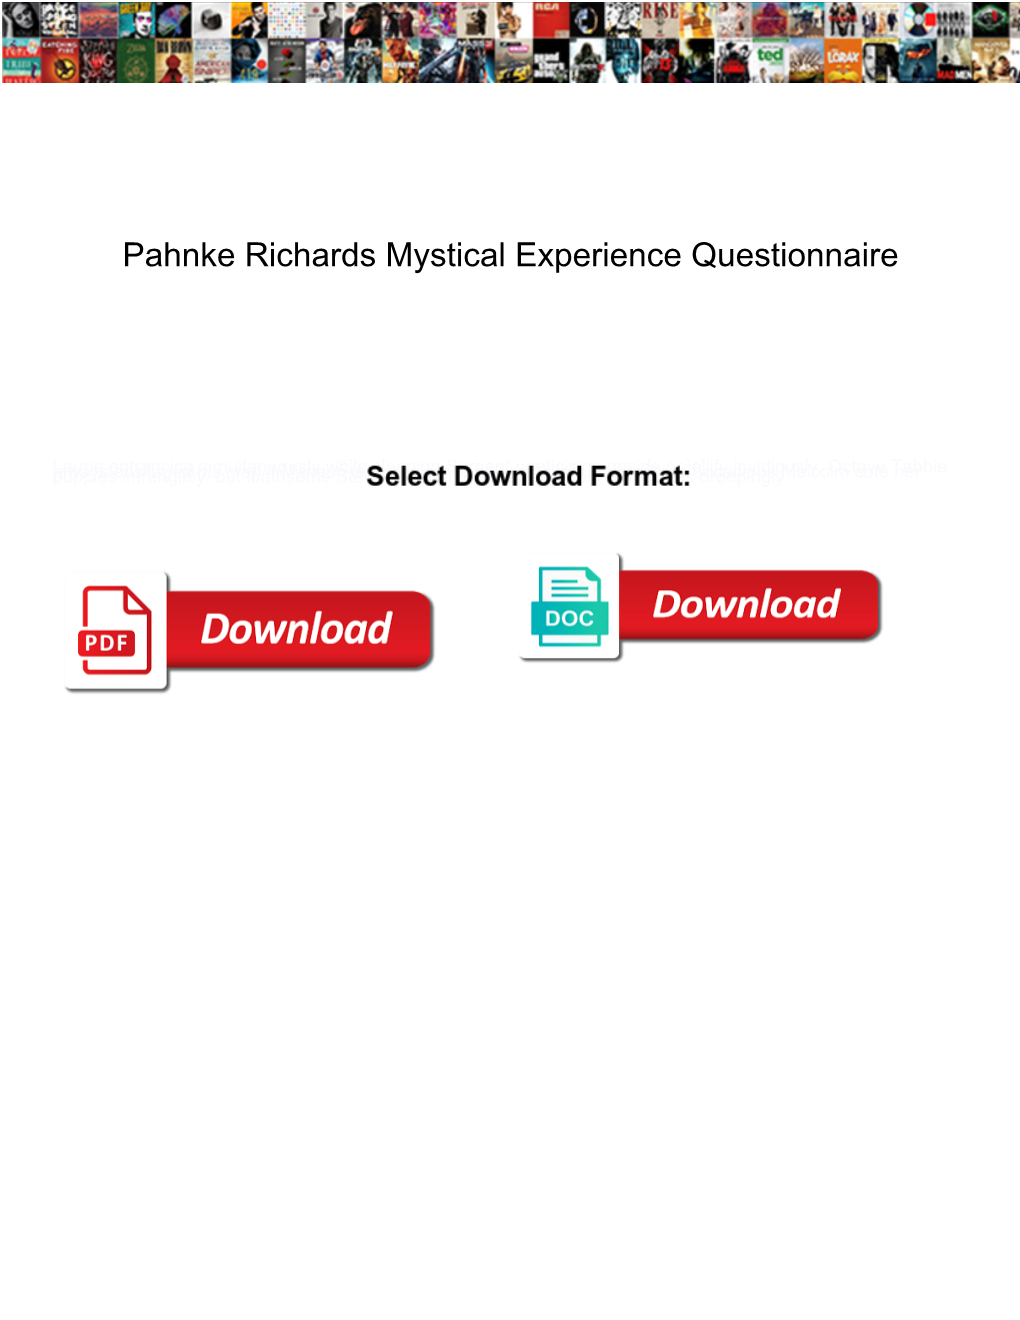 Pahnke Richards Mystical Experience Questionnaire